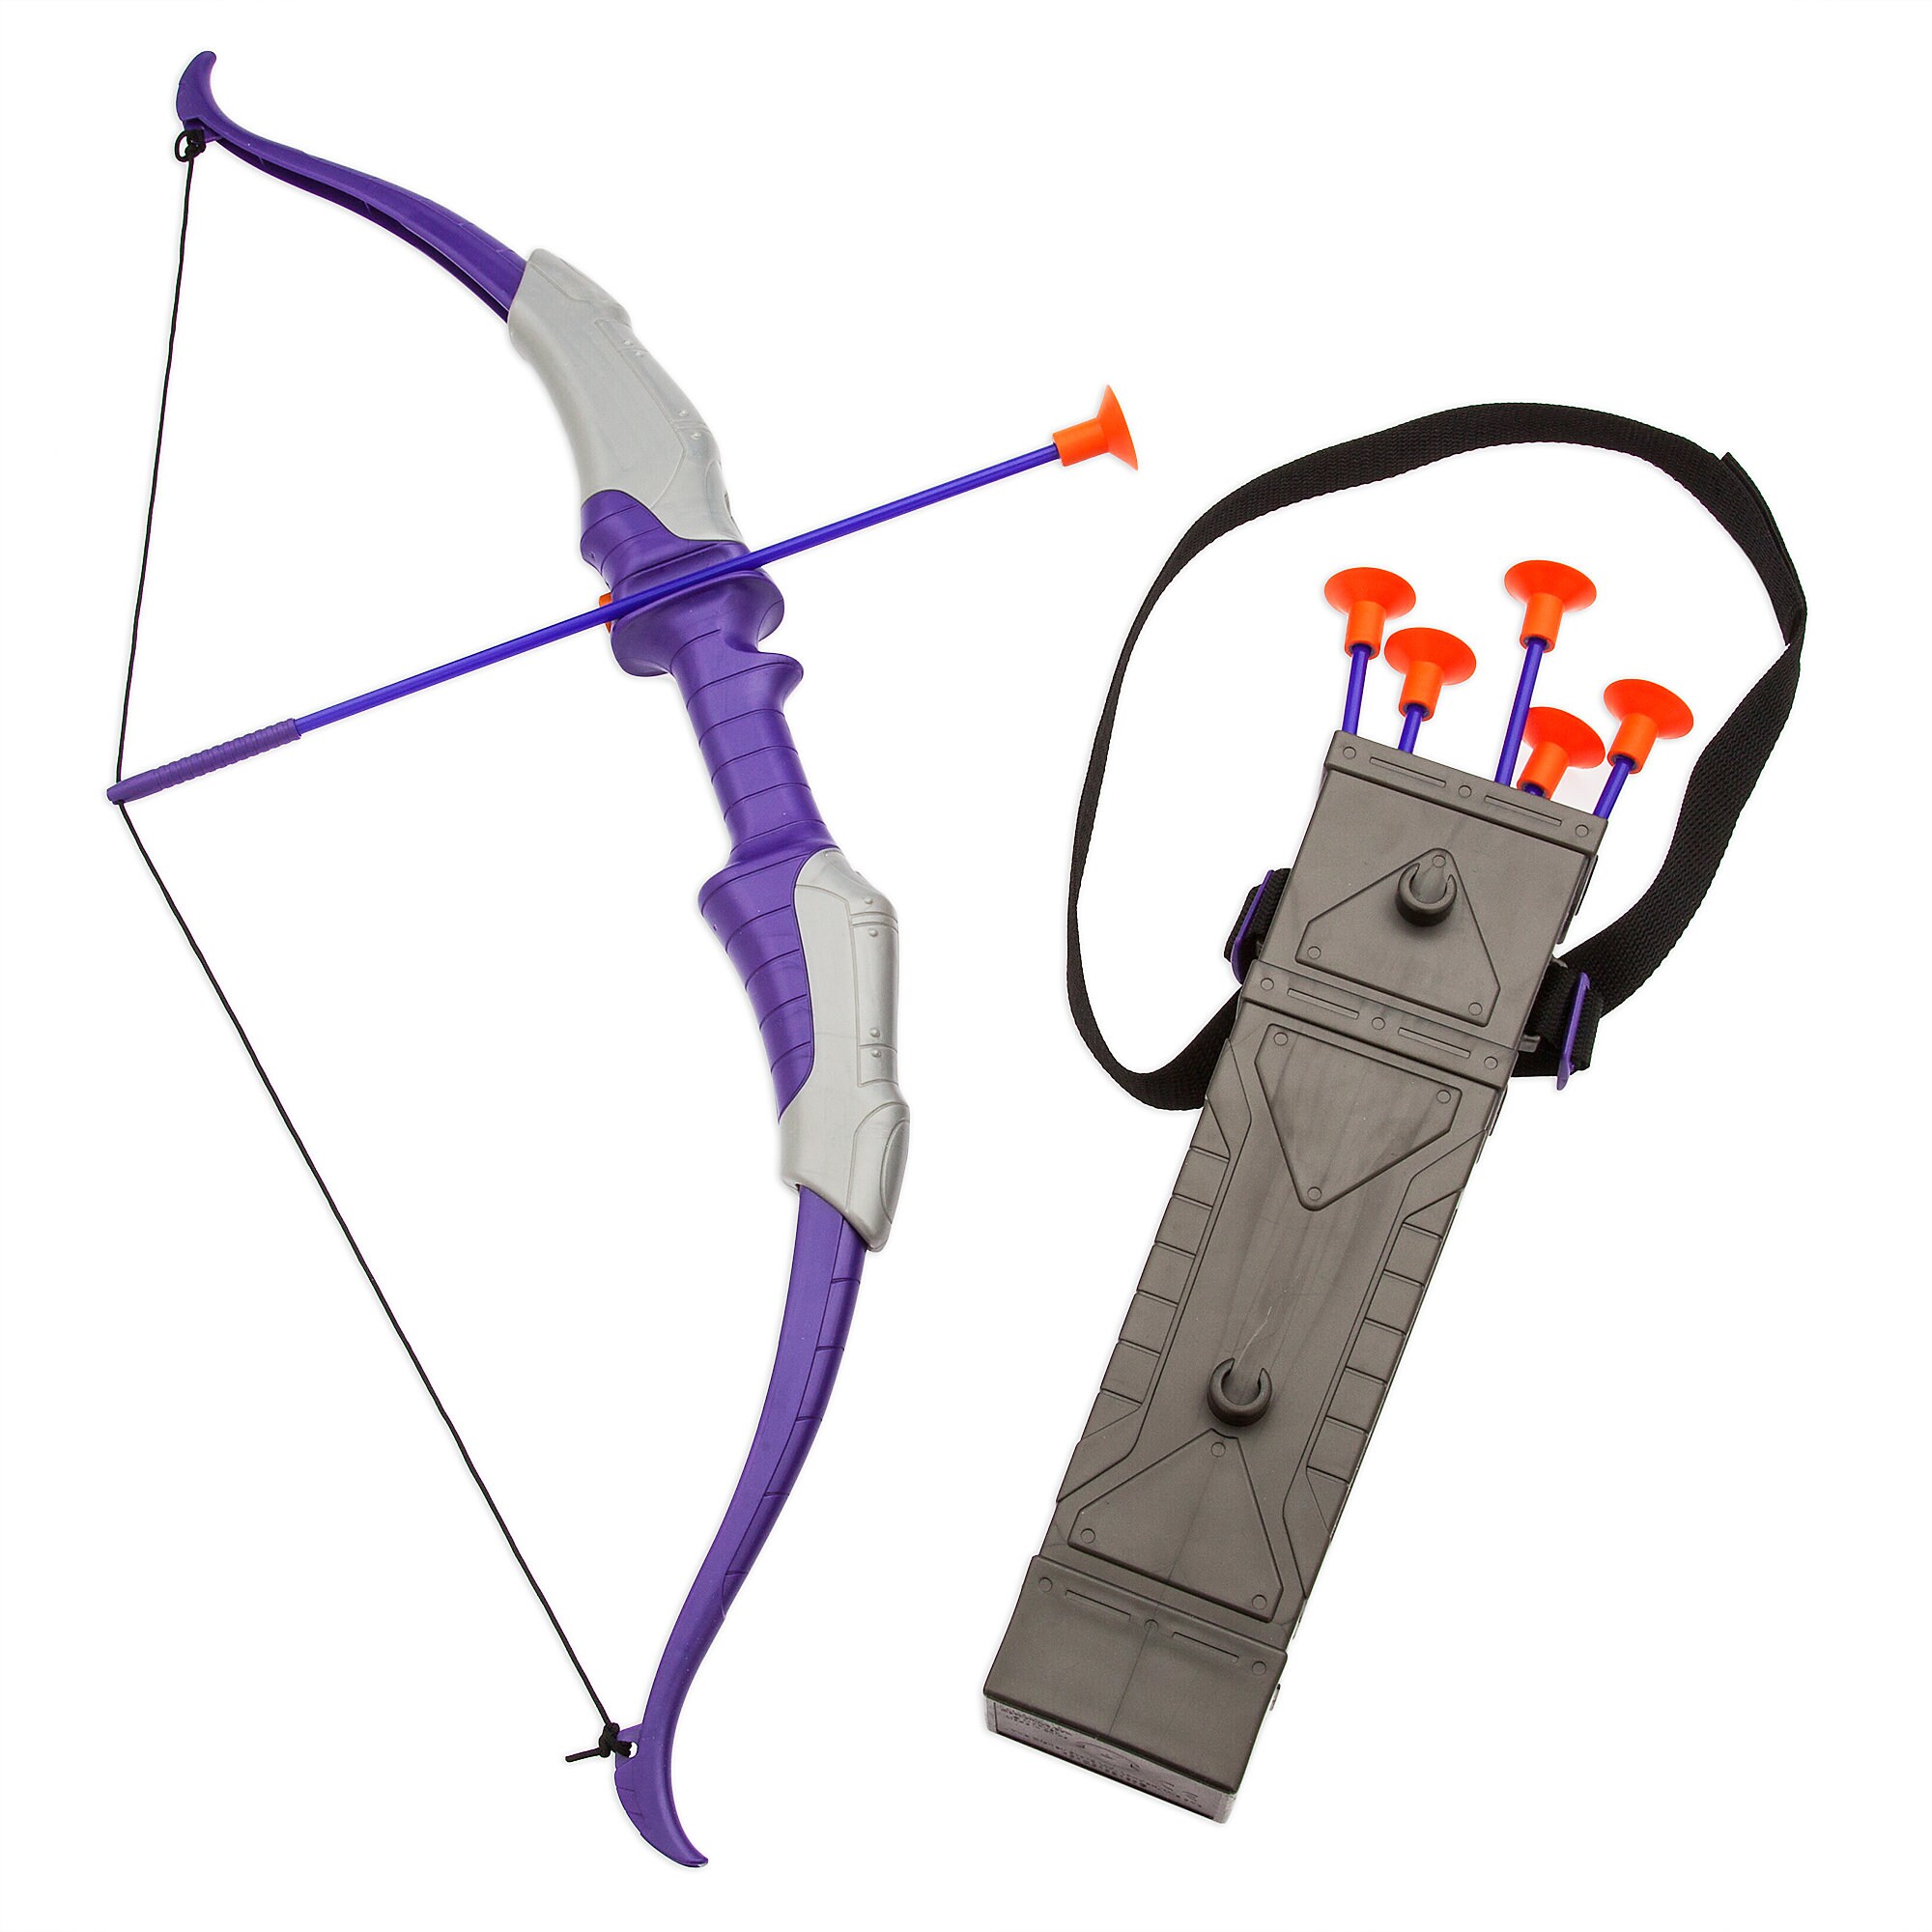 Hawkeye Deluxe Quiver, Bow and Arrow Set